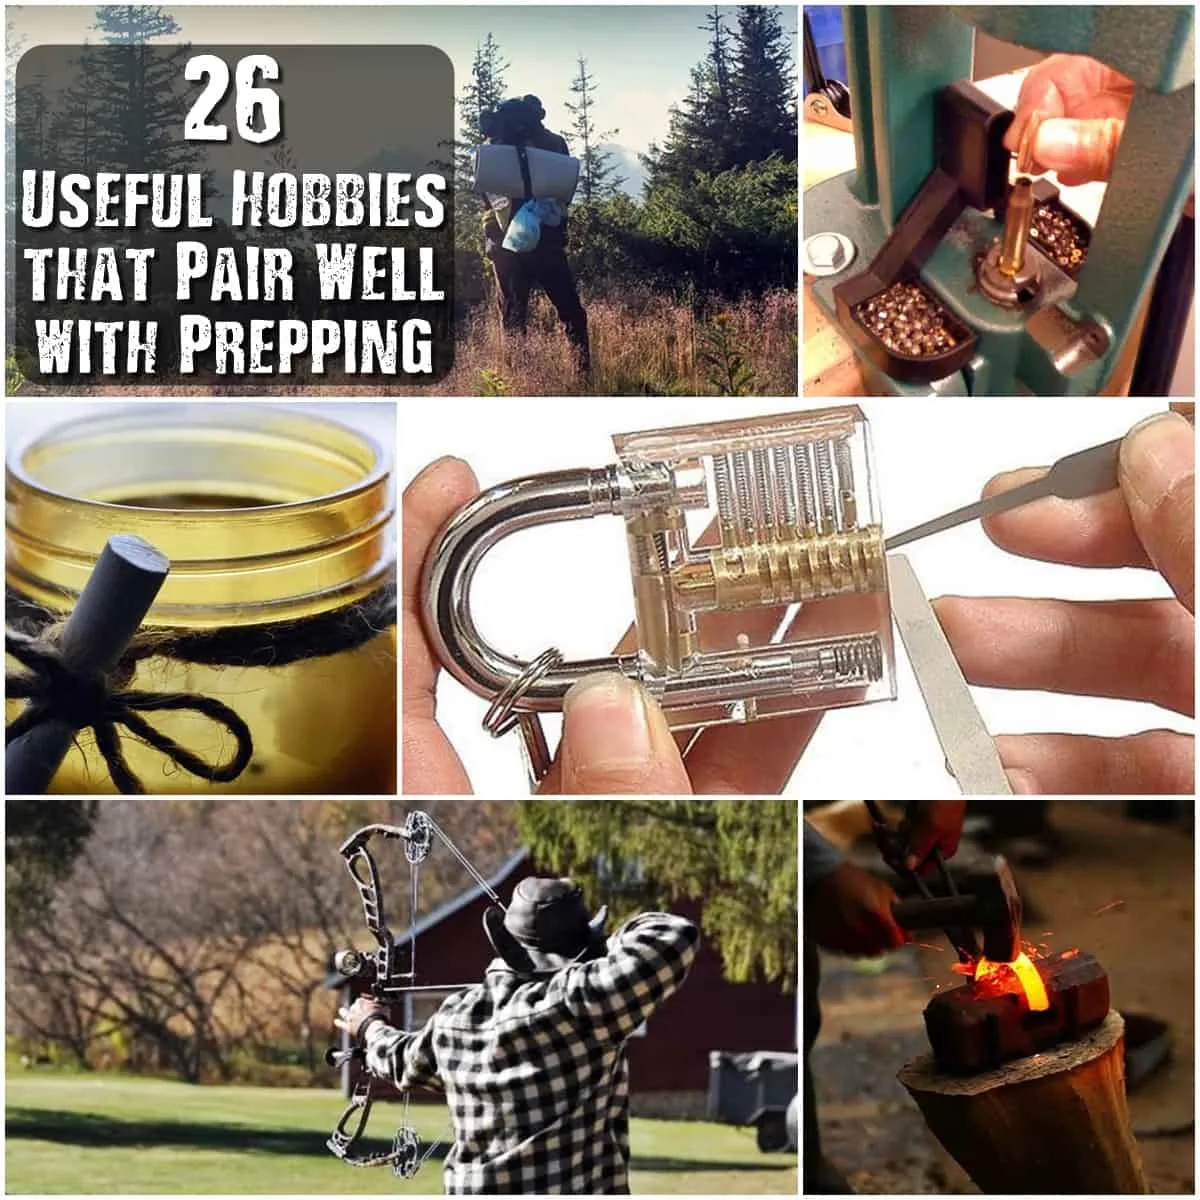 26 Useful Hobbies that Pair Well with Prepping